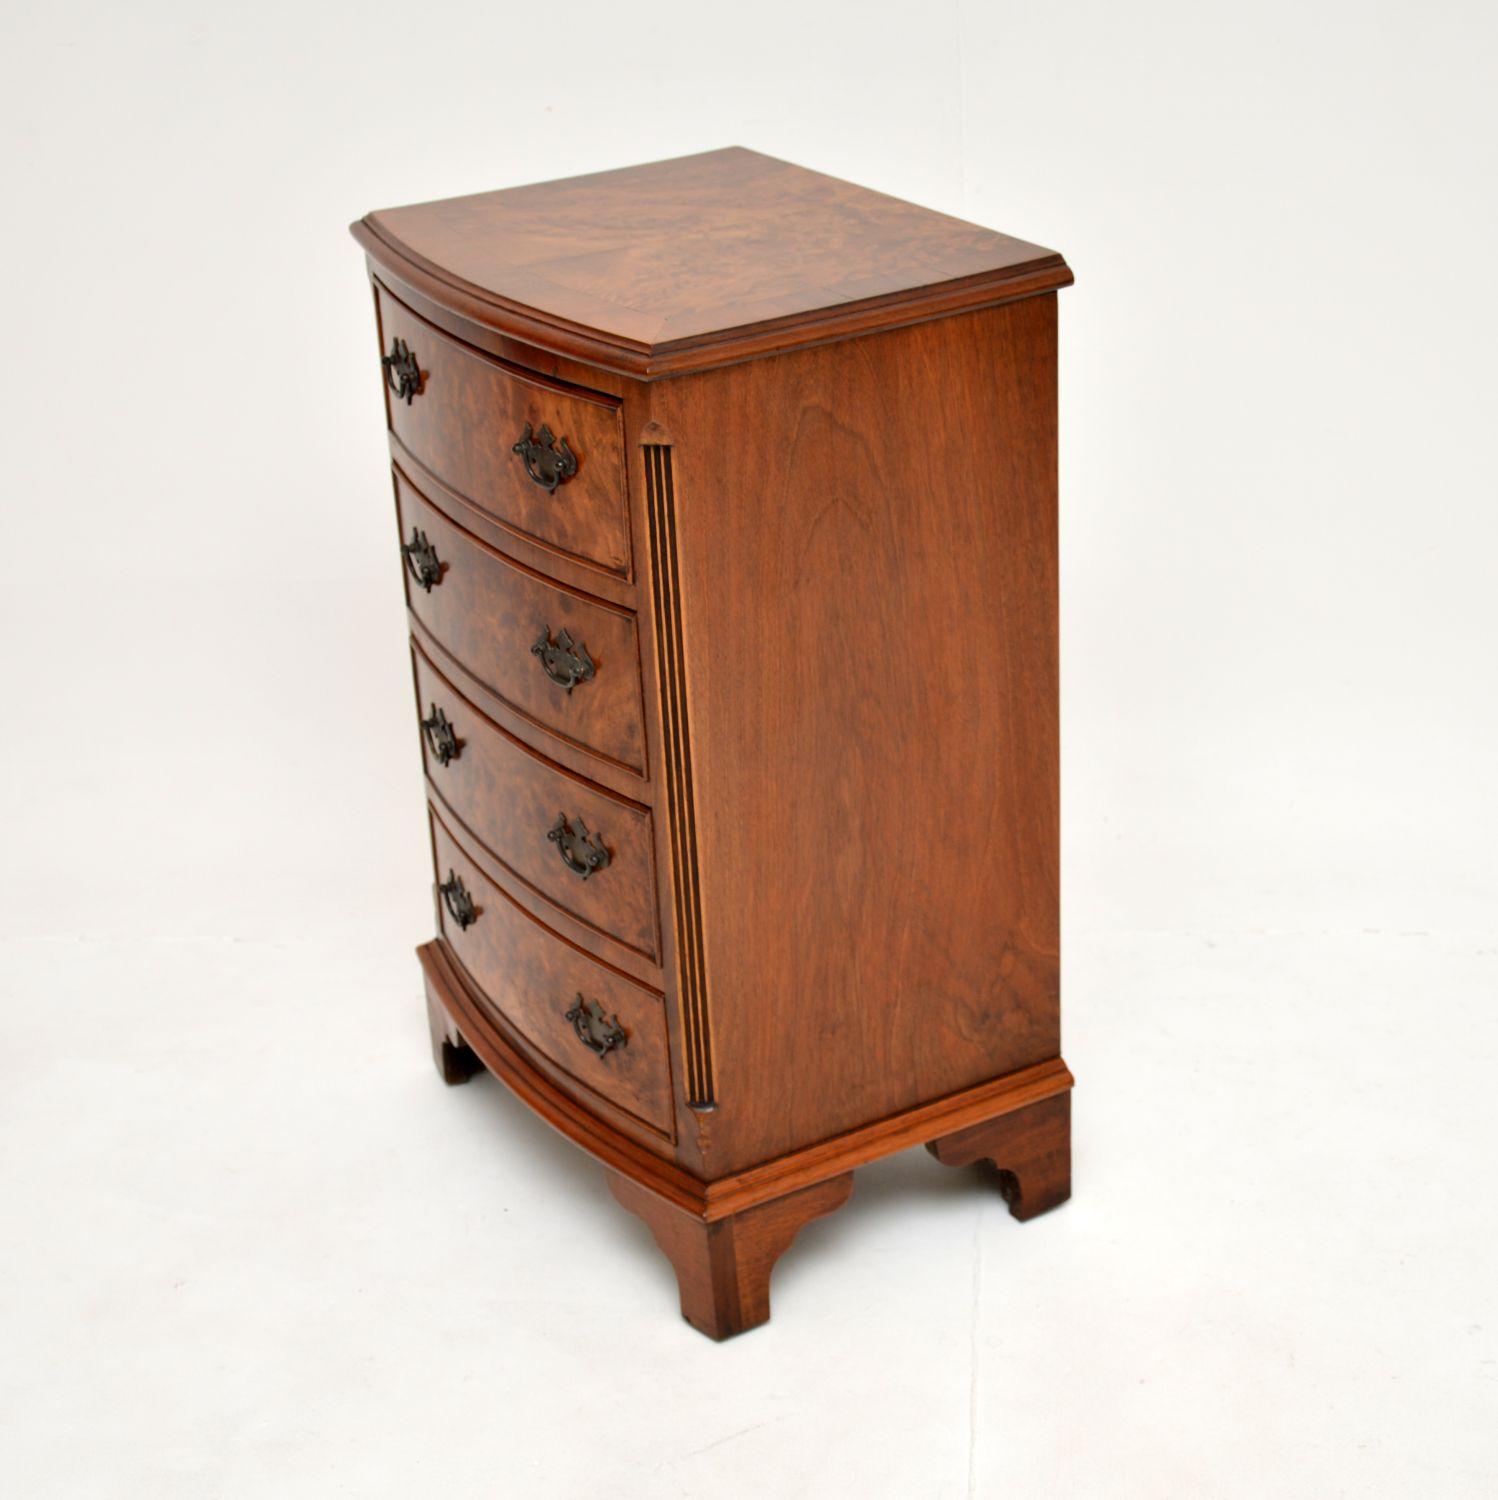 British Antique Bow Front Chest of Drawers in Burr Walnut